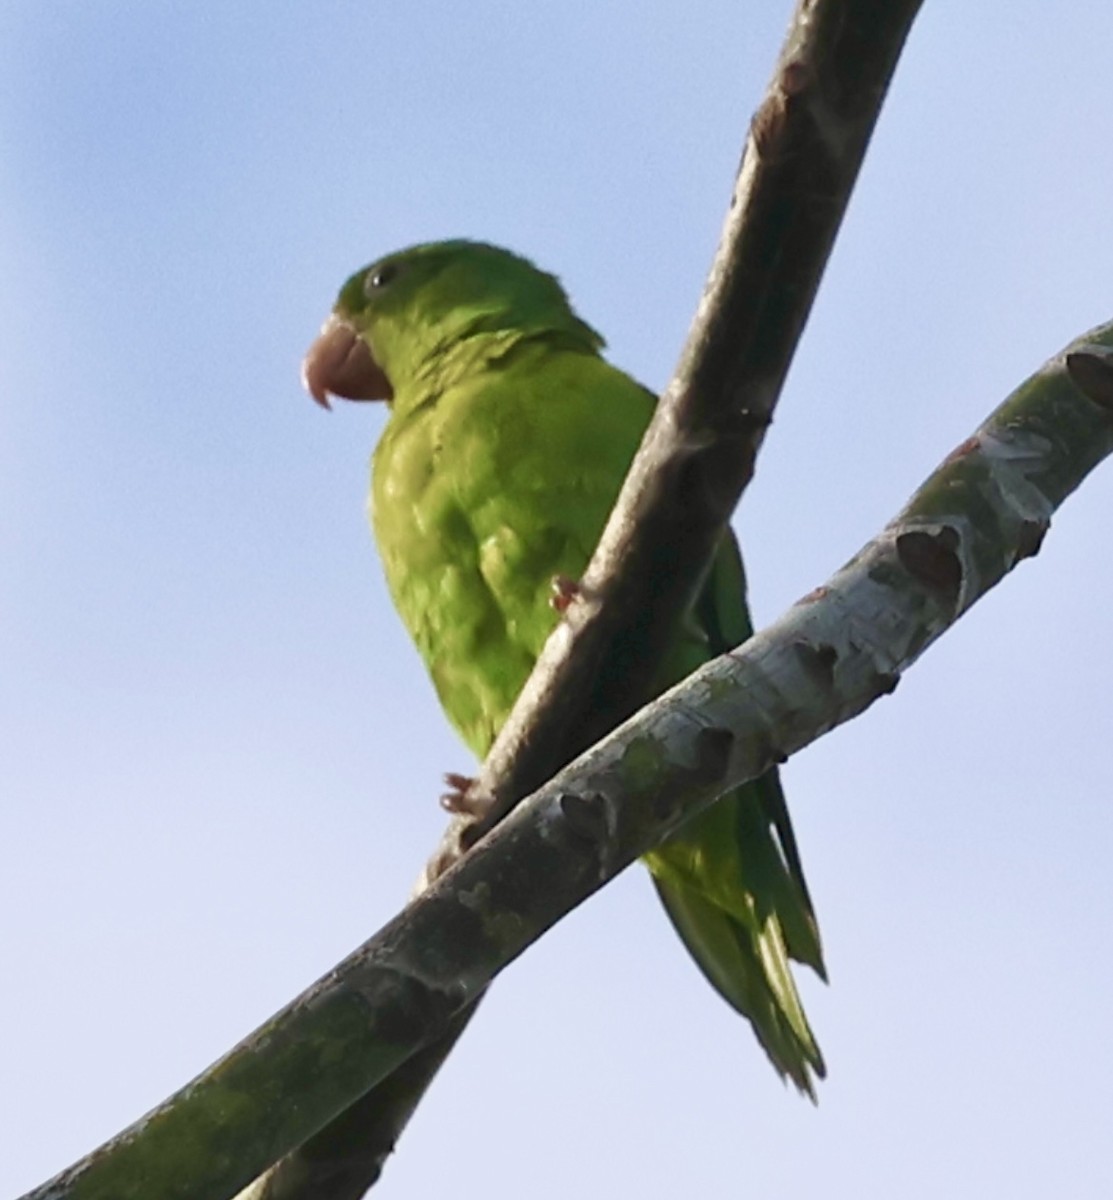 White-fronted Parrot - Debbie Crowley